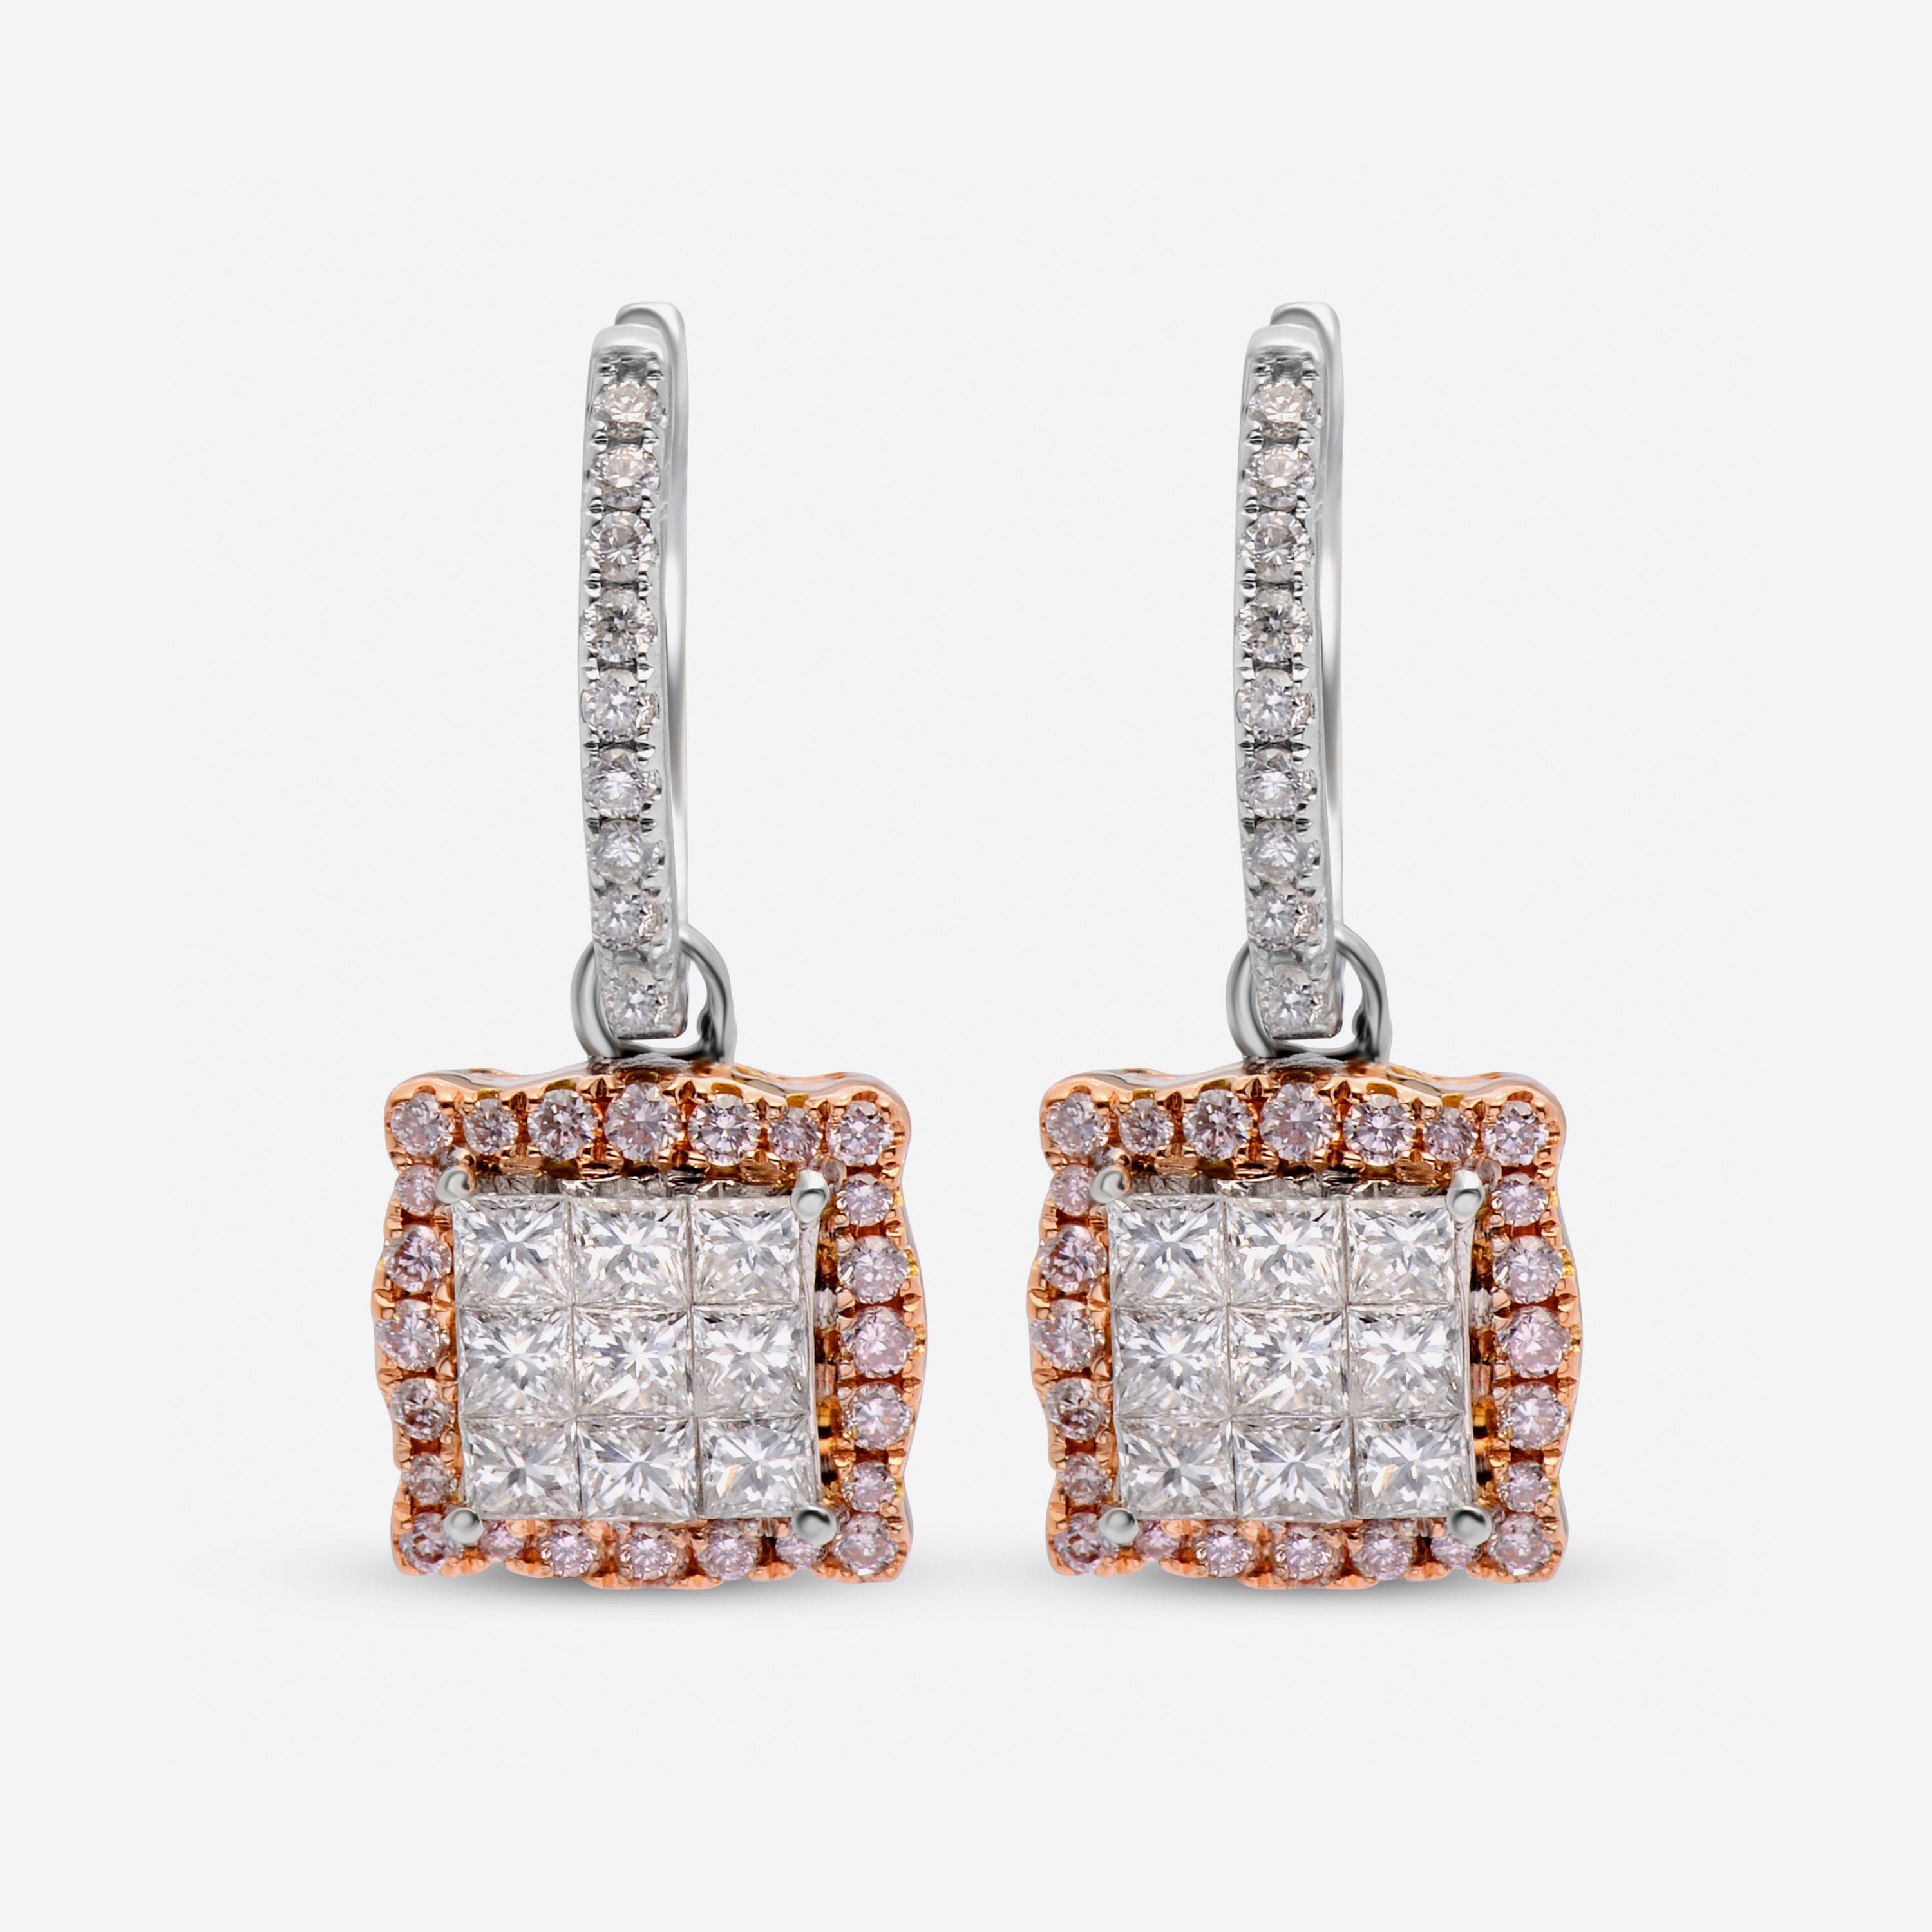 Gregg Ruth 18K Gold, White Diamond 0.91ct. tw. and Fancy Pink Diamond 0.29ct. tw. Drop Earrings 50637